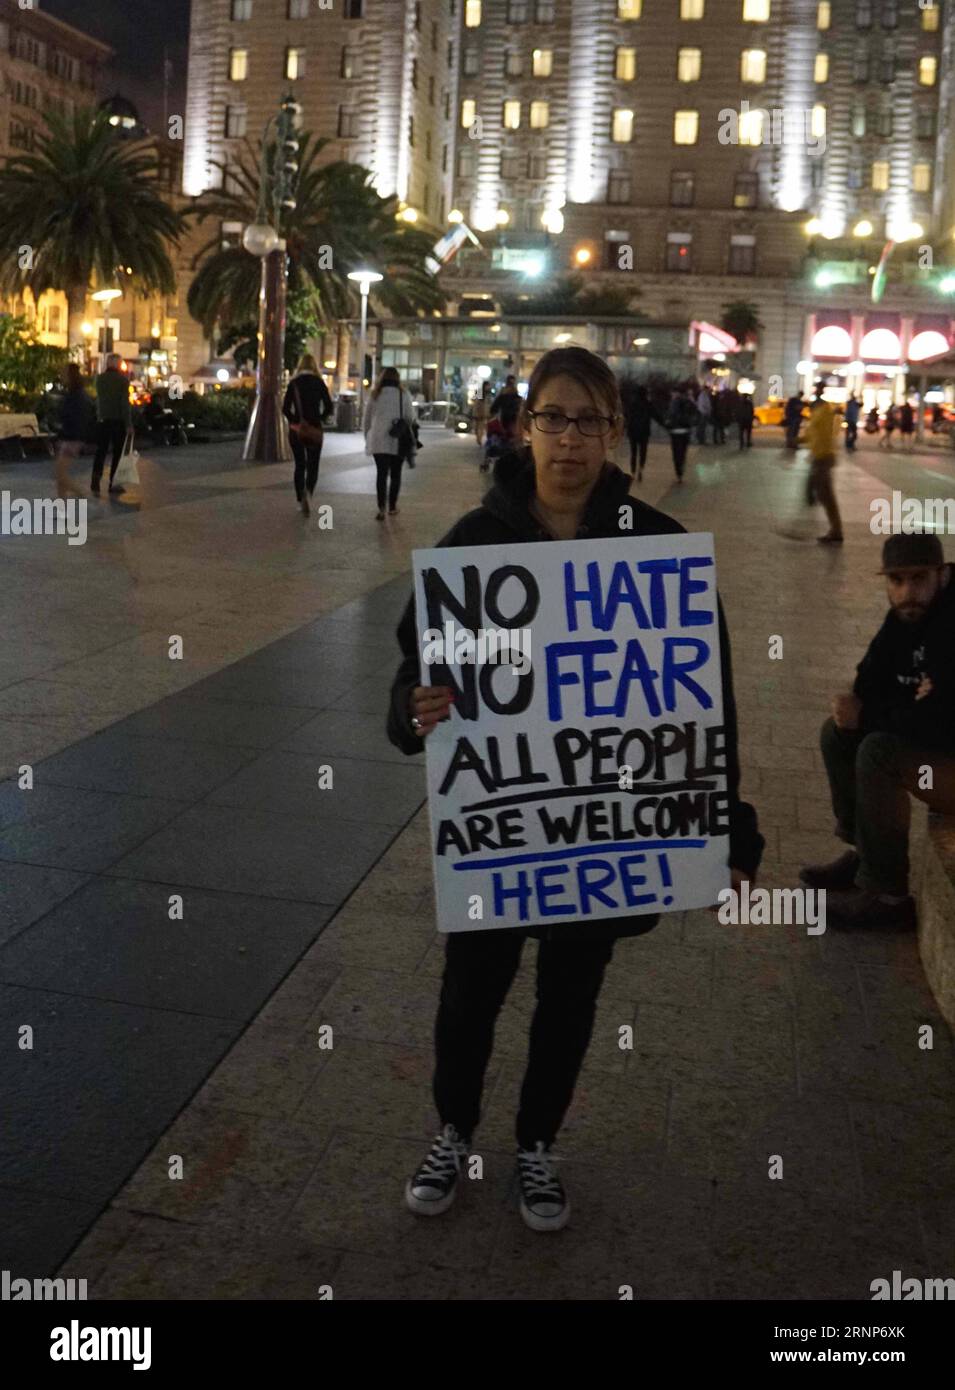 (170813) -- SAN FRANCISCO, Aug. 13, 2017 -- A woman holding a sign reads No Hate No Fear All People Are Welcome Here take part in a candle light vigil in downtown San Francisco, the United States, on August 12, 2017. Three people were killed and 19 wounded in Charlottesville, as a supporter of the so-called alt-right movement rammed his car into a crowd of protesters against a white nationalist rally. Then, a local group known as Indivisible SF, short for San Francisco, called for the vigil to stand in solidarity with Charlottesville. ) (srb) U.S.-SAN FRANCISCO-VIGIL XuxYong PUBLICATIONxNOTxIN Stock Photo